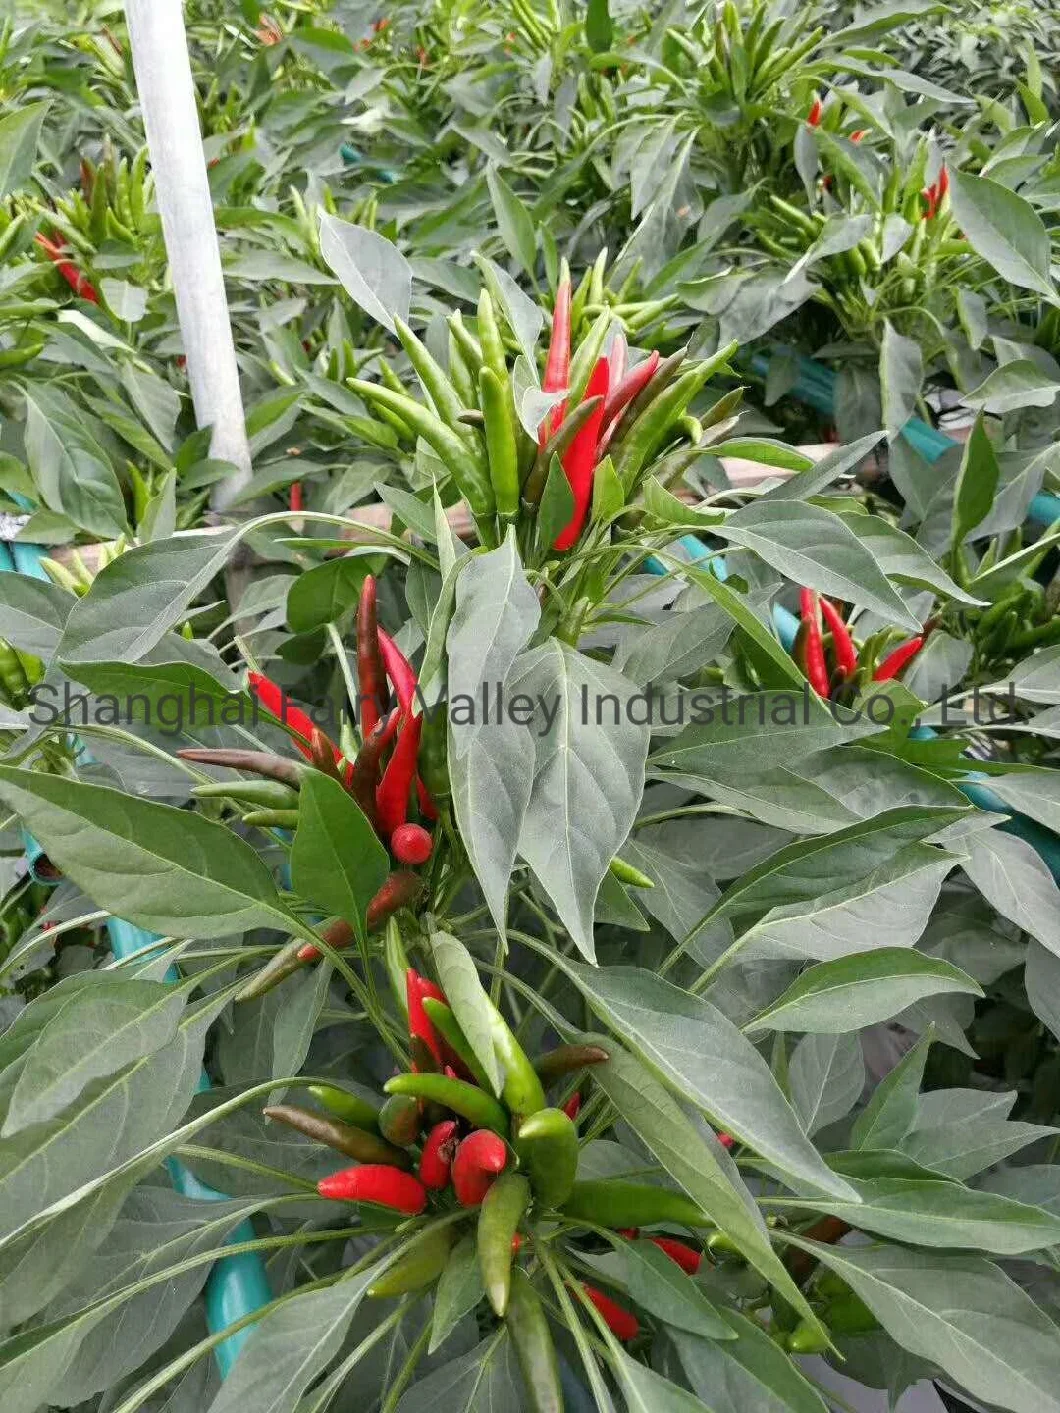 Hybrid F1 Red Cluster Pepper Chilli Seeds Vegetable Seeds for Growing-Sky King Star No. 2